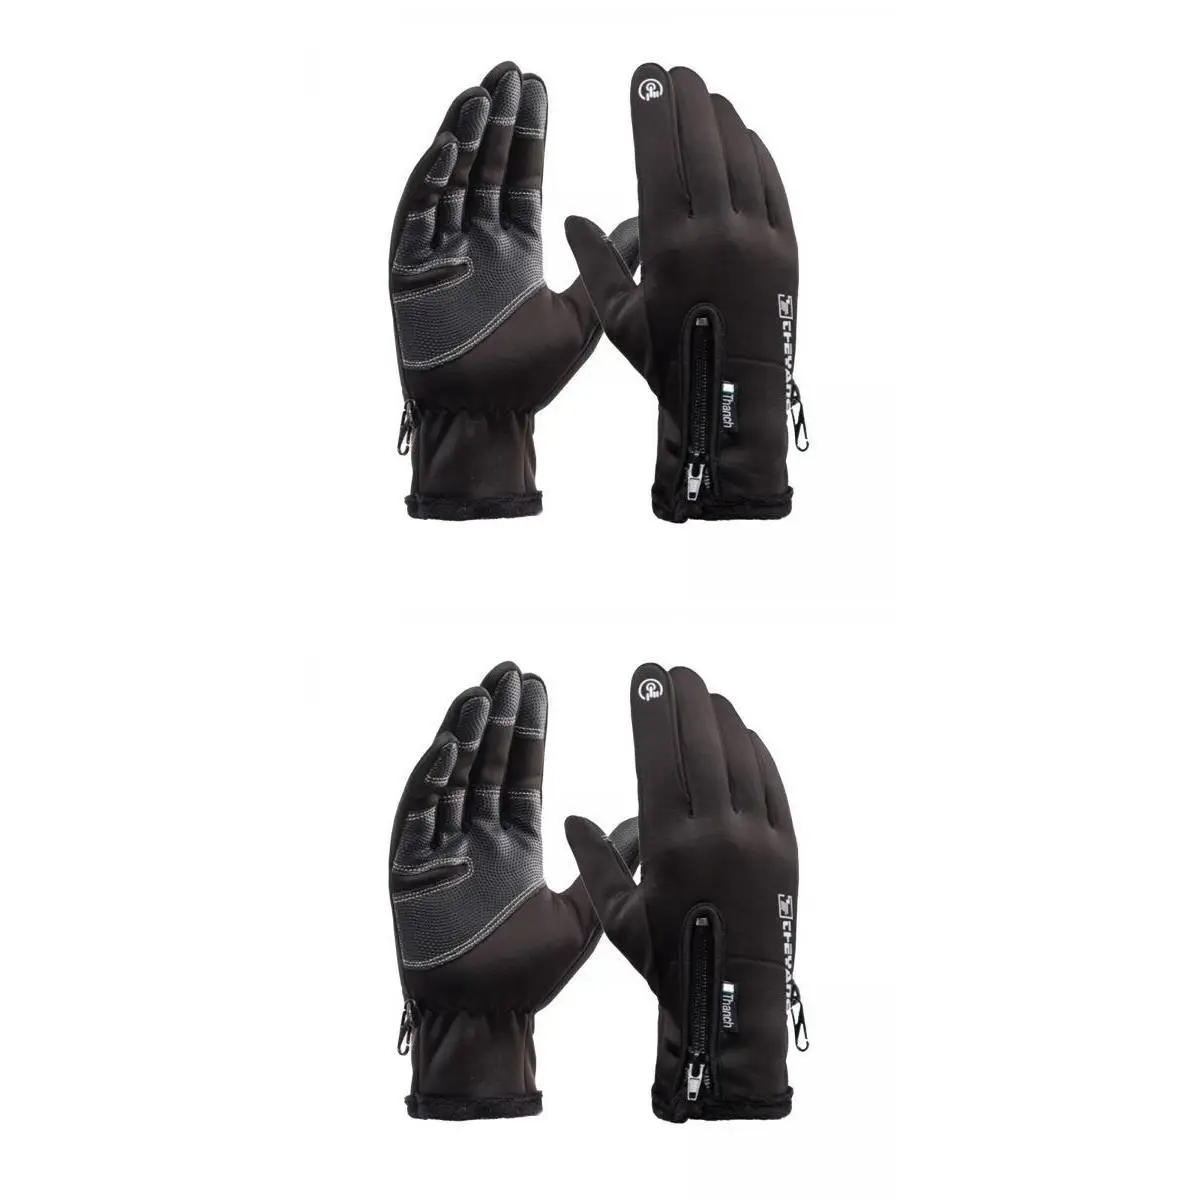 2 Piece Air Vent Pair Windproof Winter Motorcycle Warm Gloves Cold Weather for Men Women Running Working Thermal Gloves